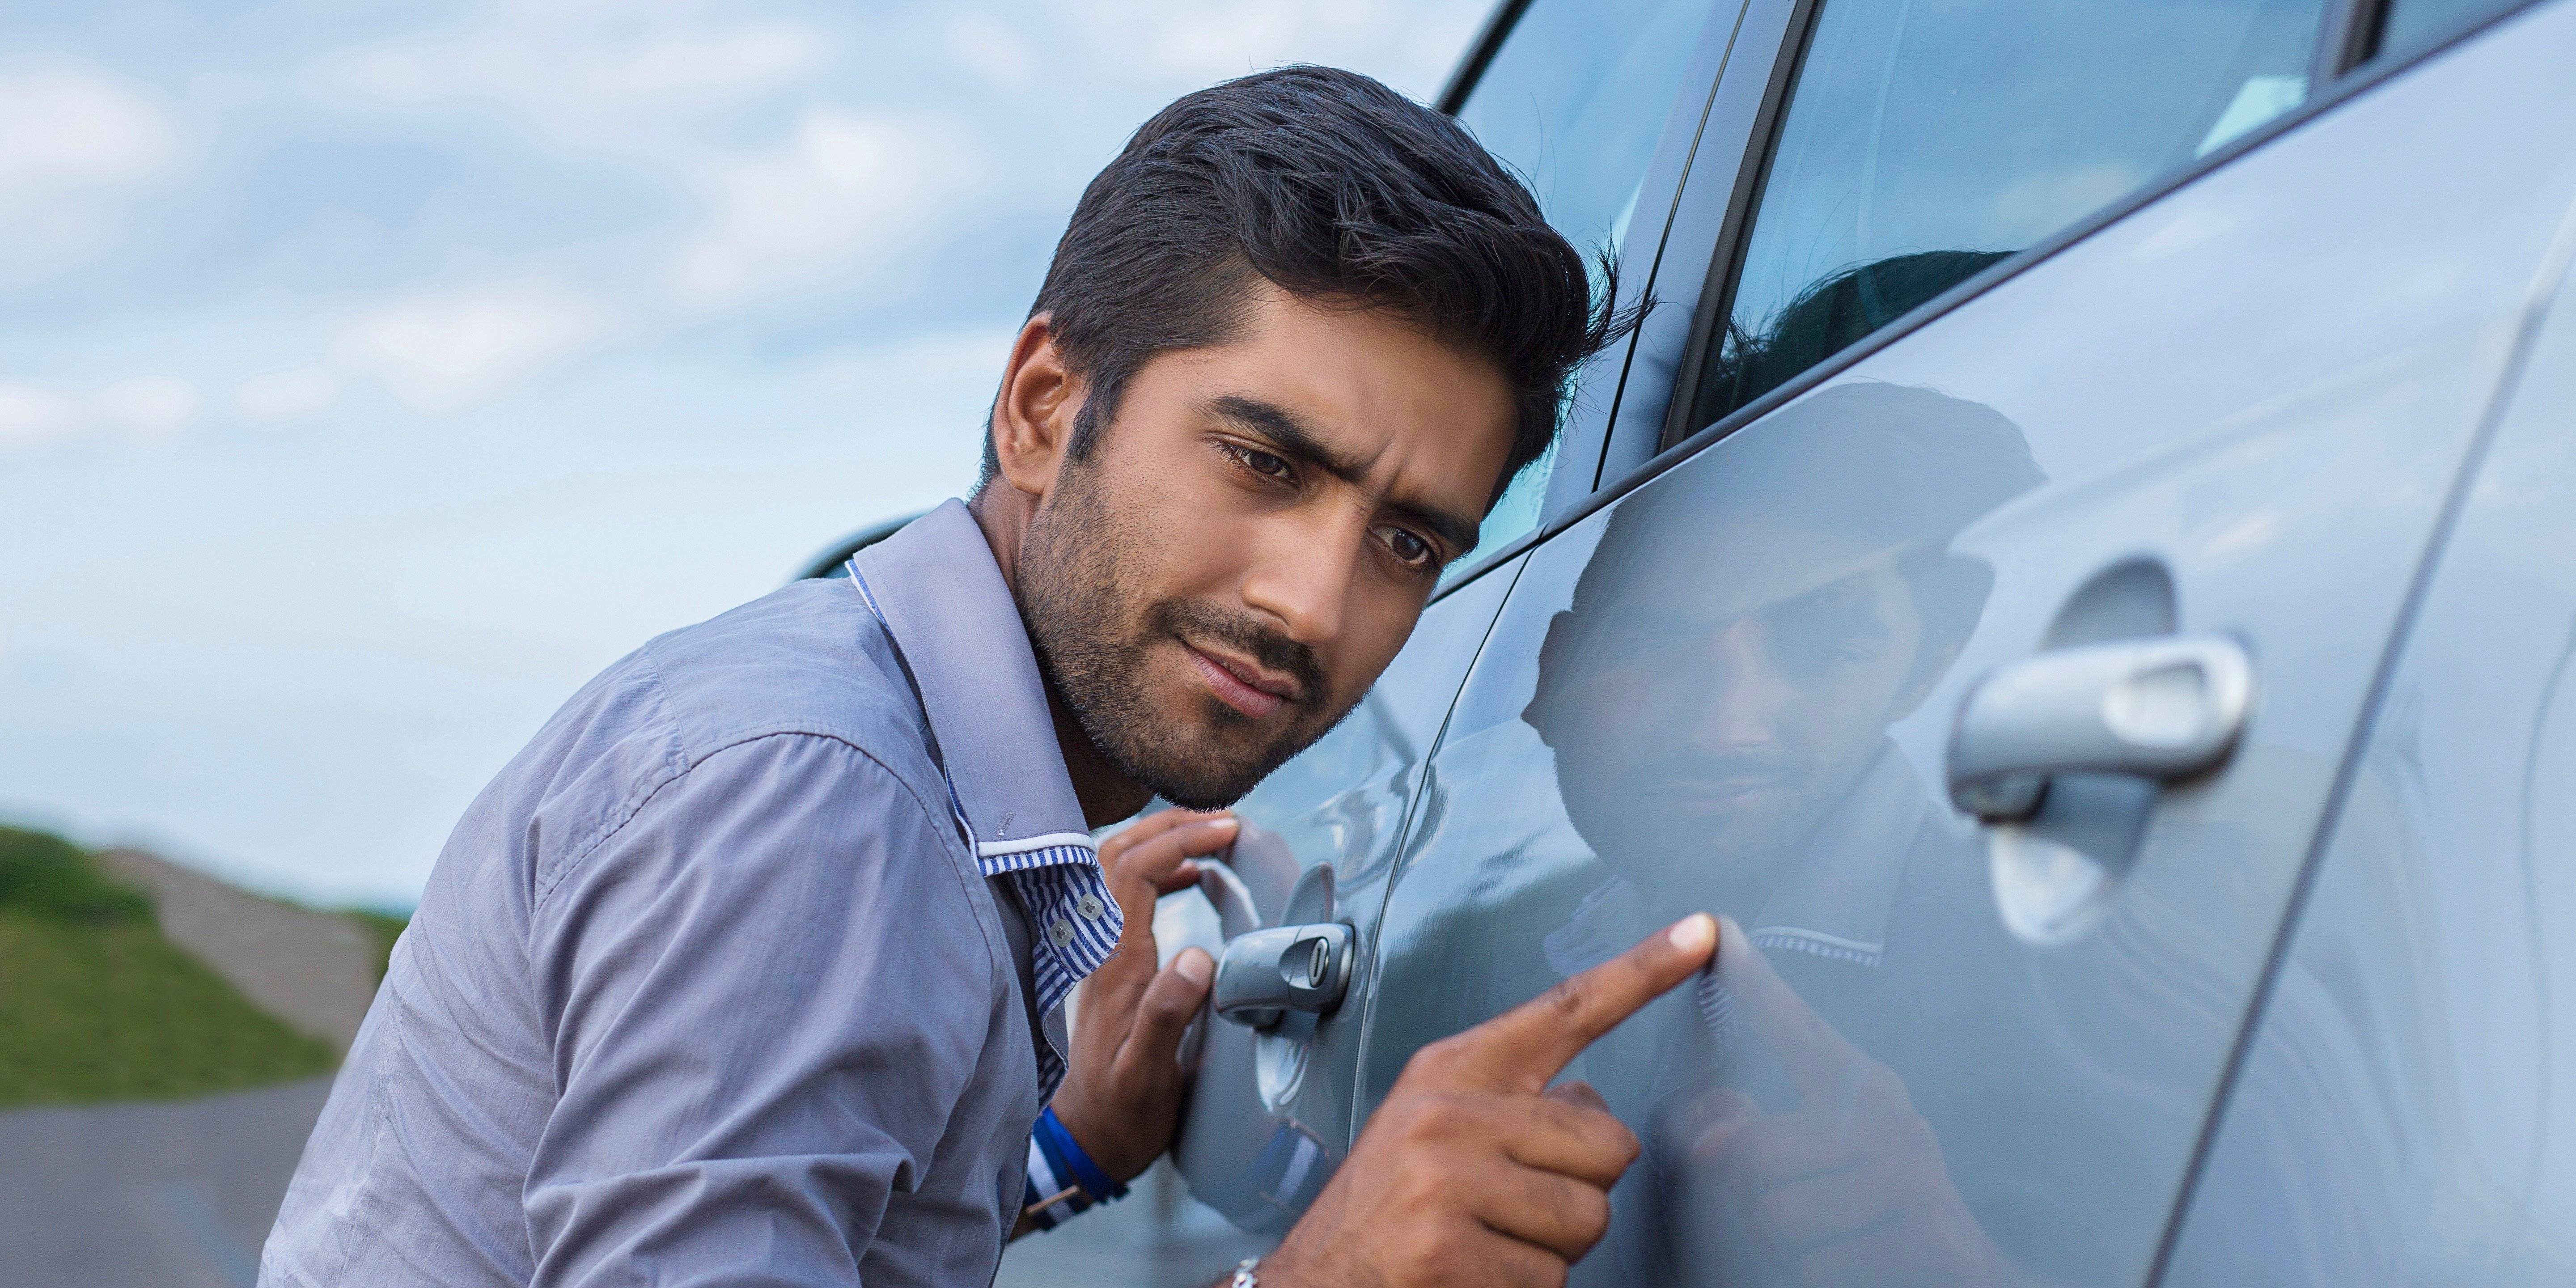 A man looks closely at the side of his vehicle while crouching down, looking concerned.